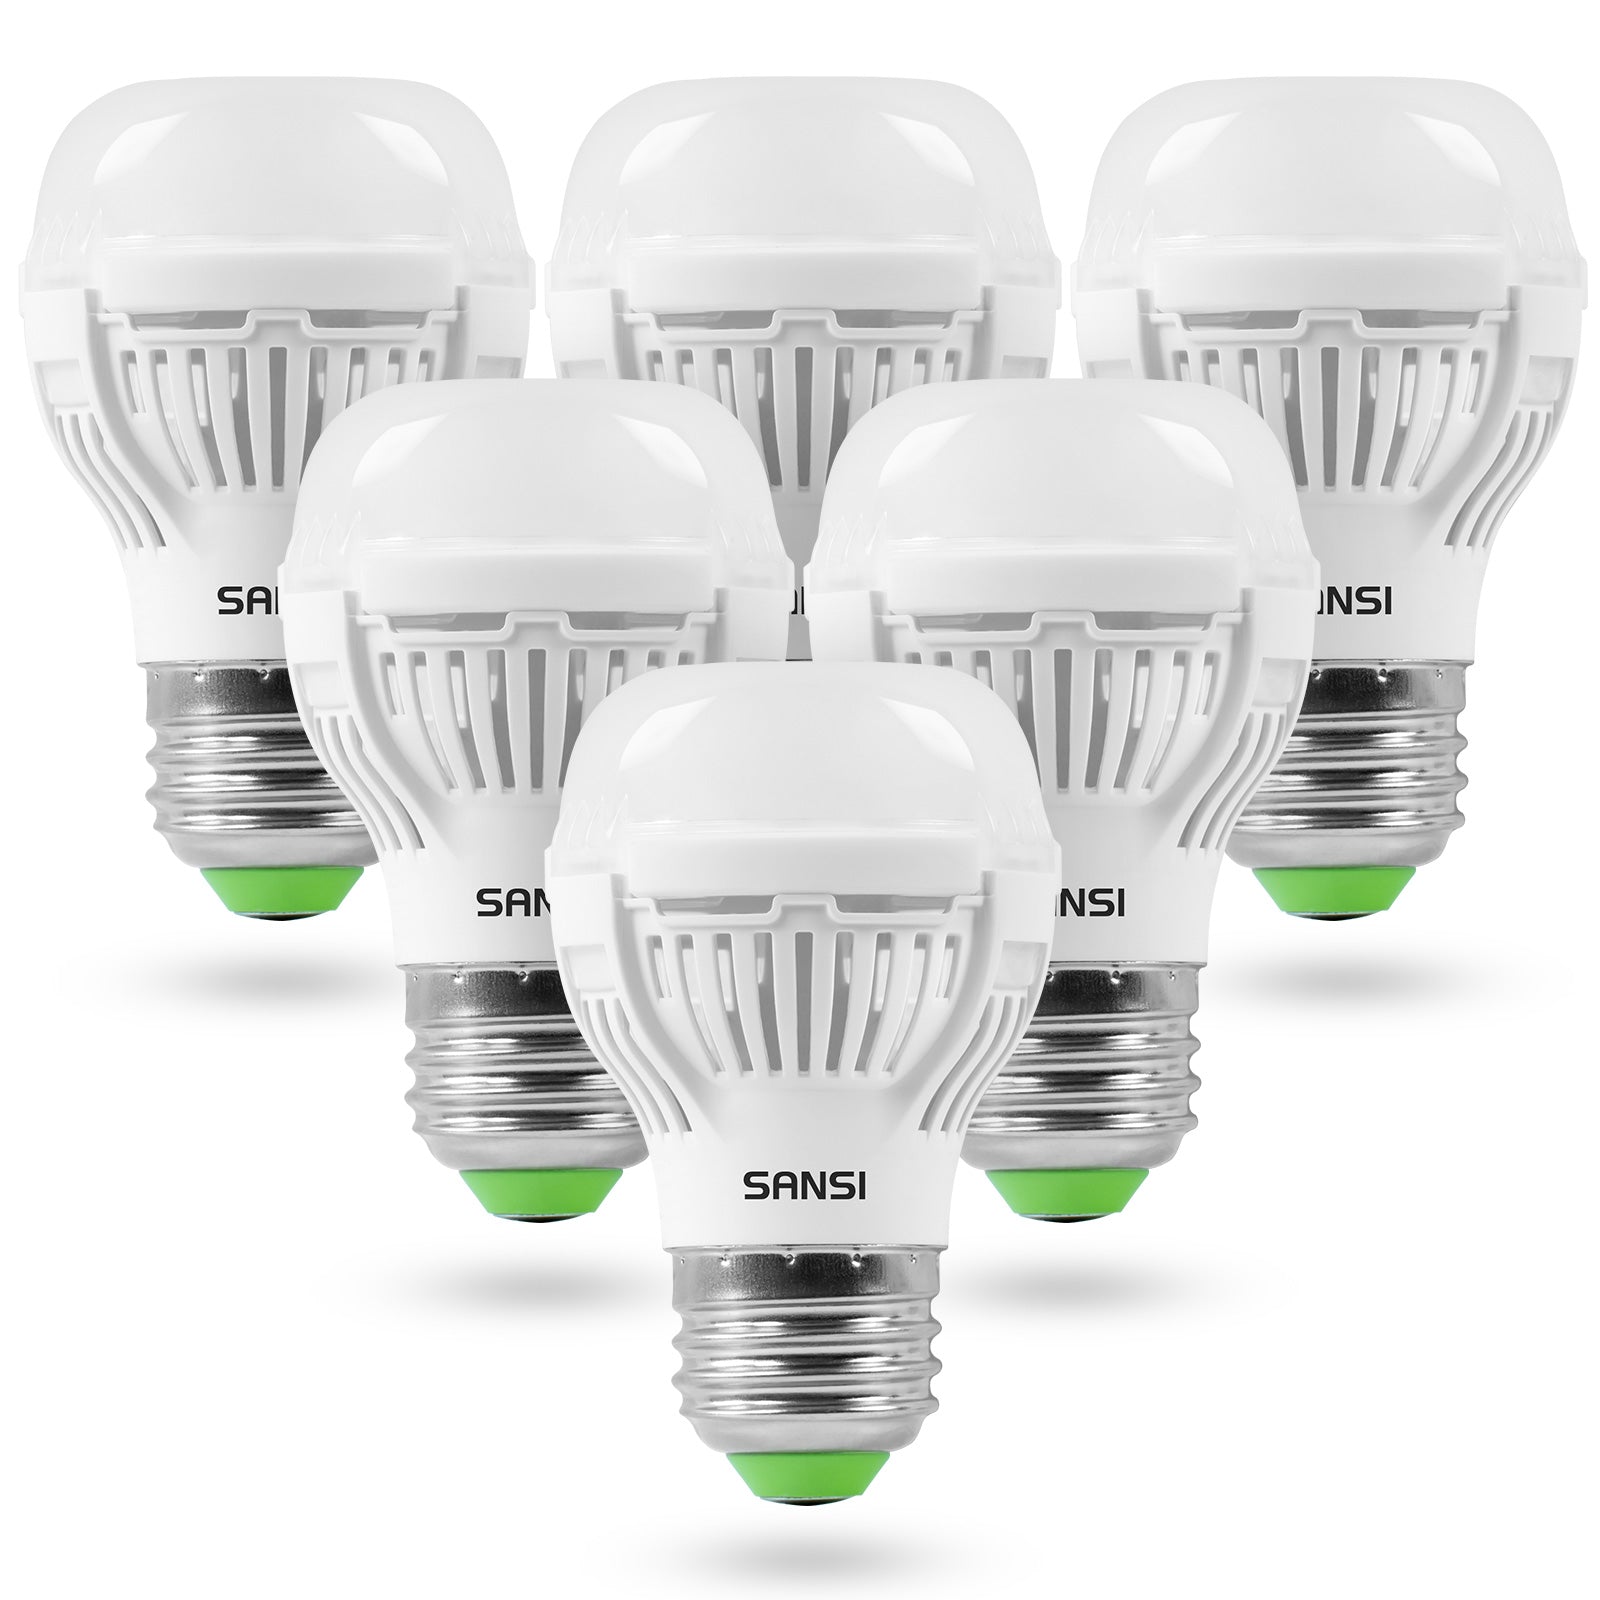 Upgraded A15 9W led light bulb with Flicker-Free for your home, 6 pack